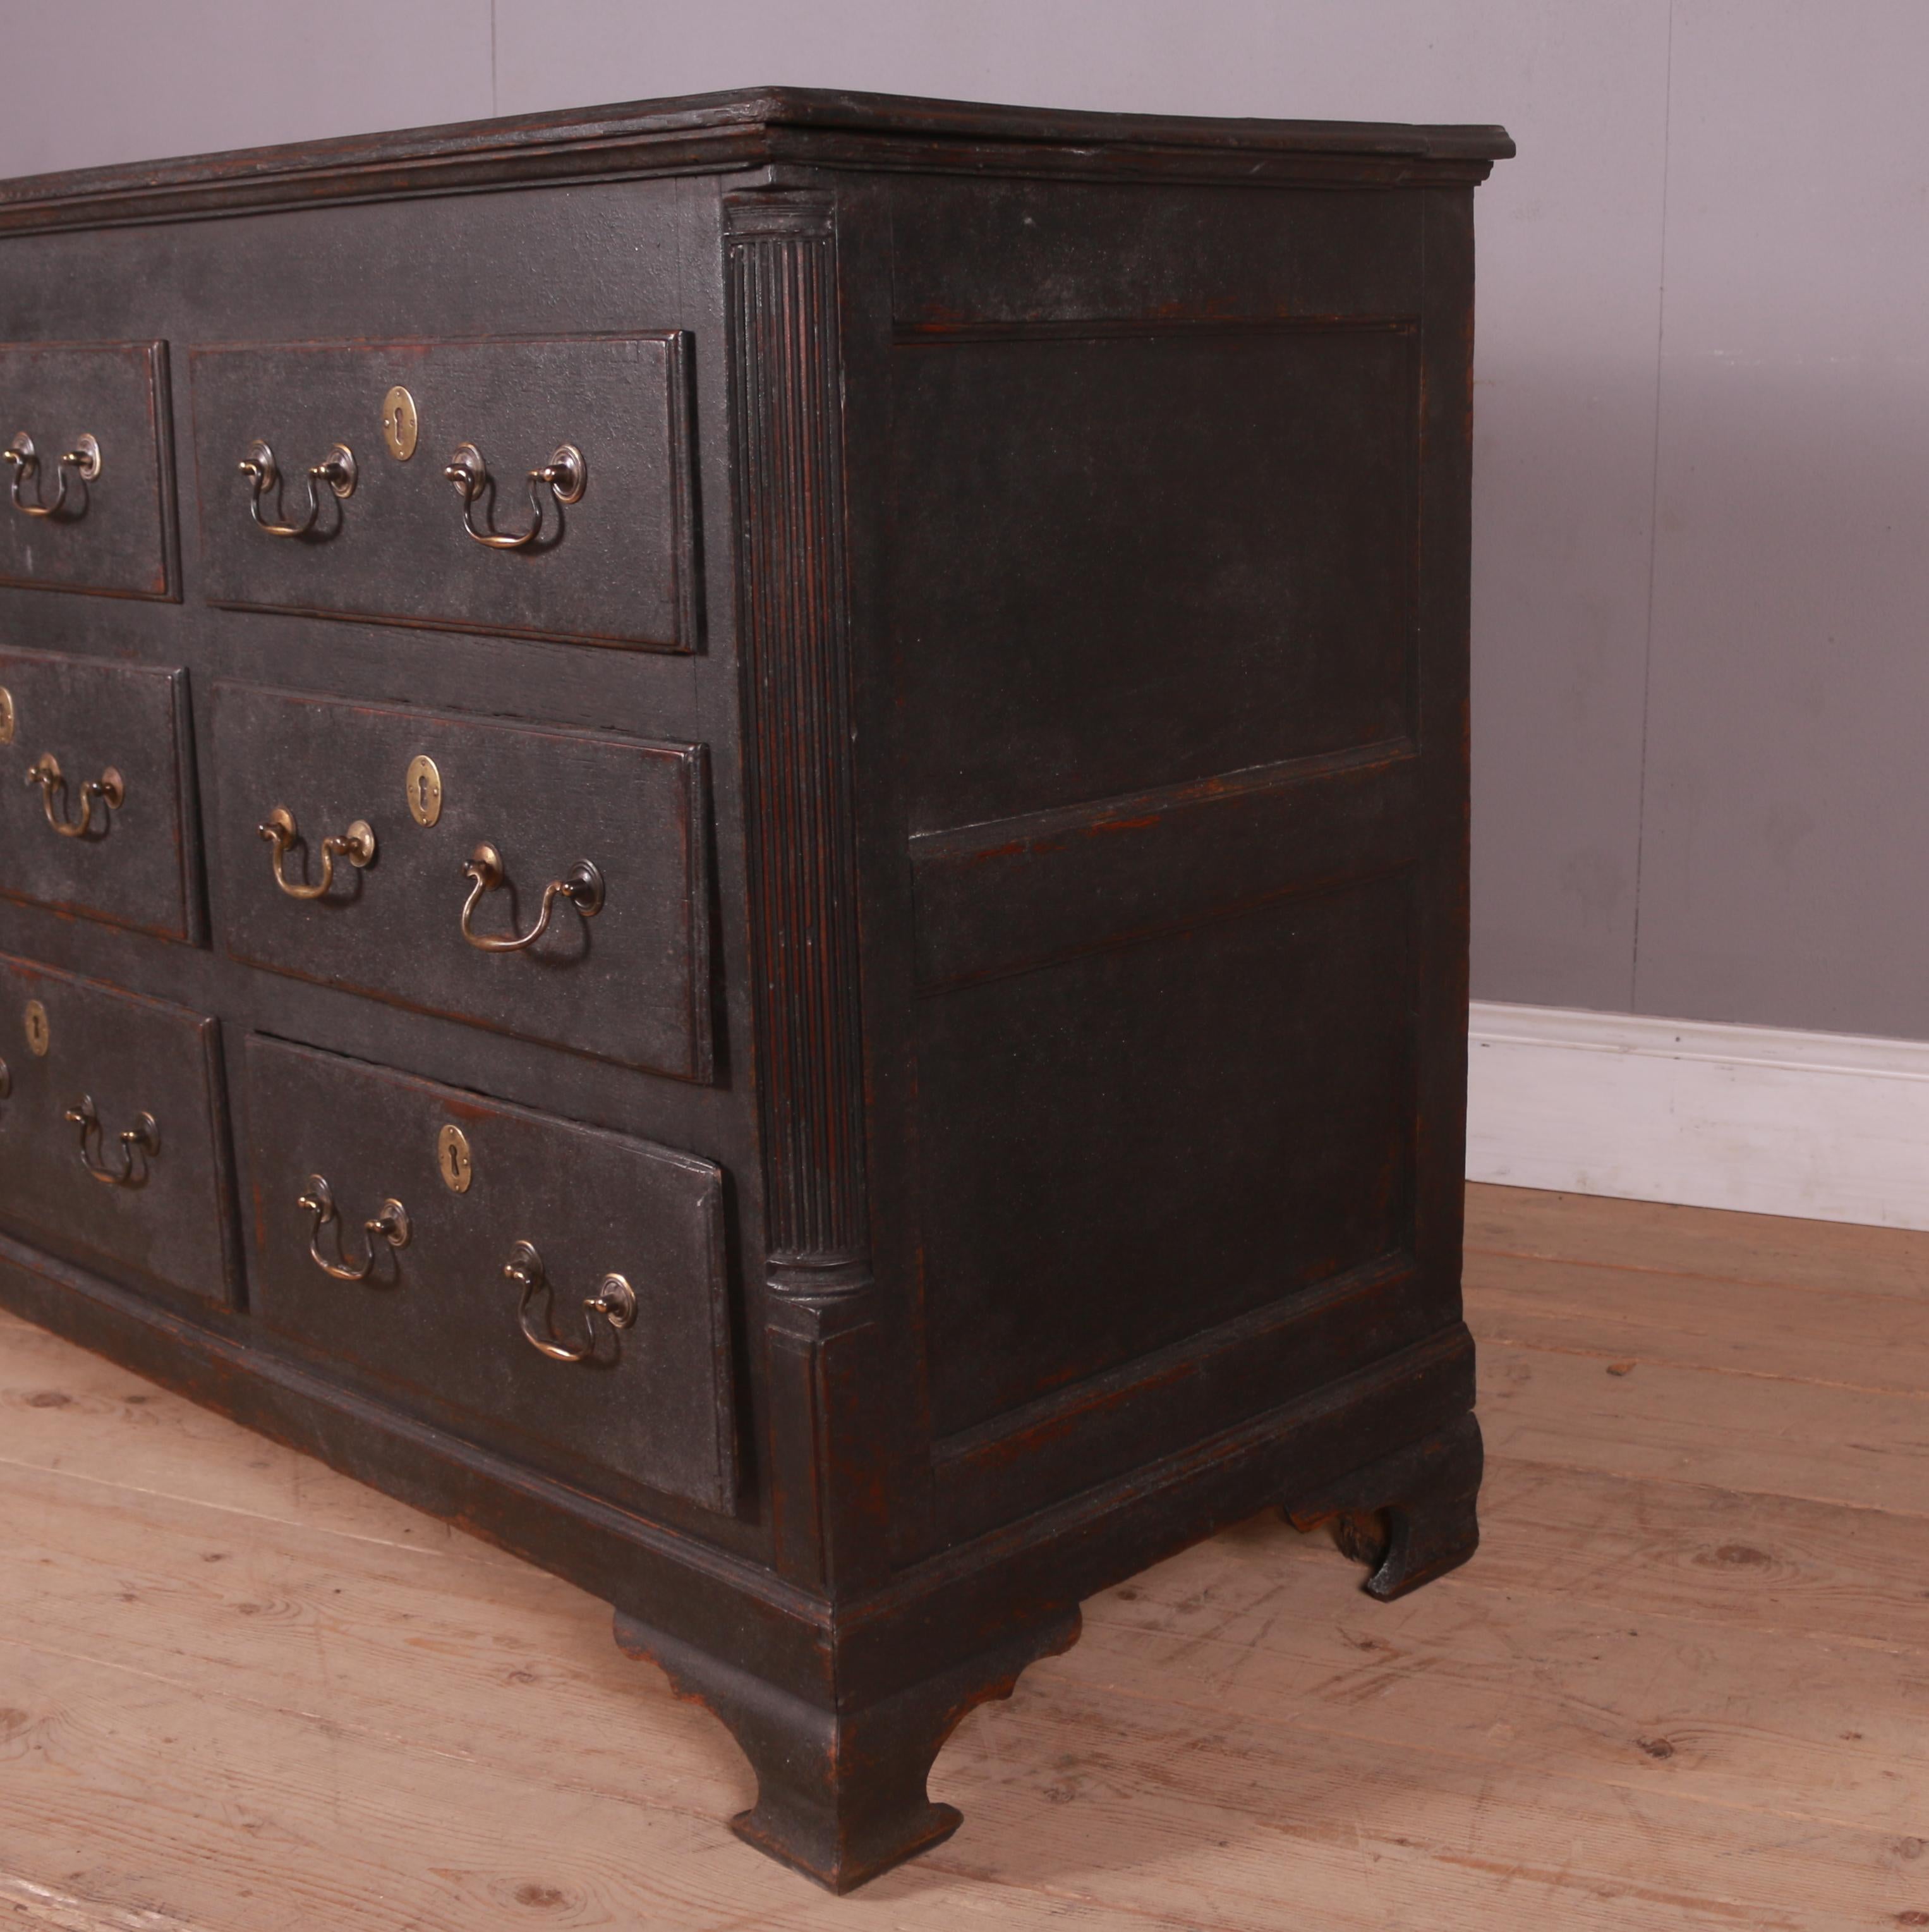 18th C English painted 9 drawer oak chest / dresser base. 1790.

Dimensions
63 inches (160 cms) wide
22 inches (56 cms) deep
35 inches (89 cms) high.

    